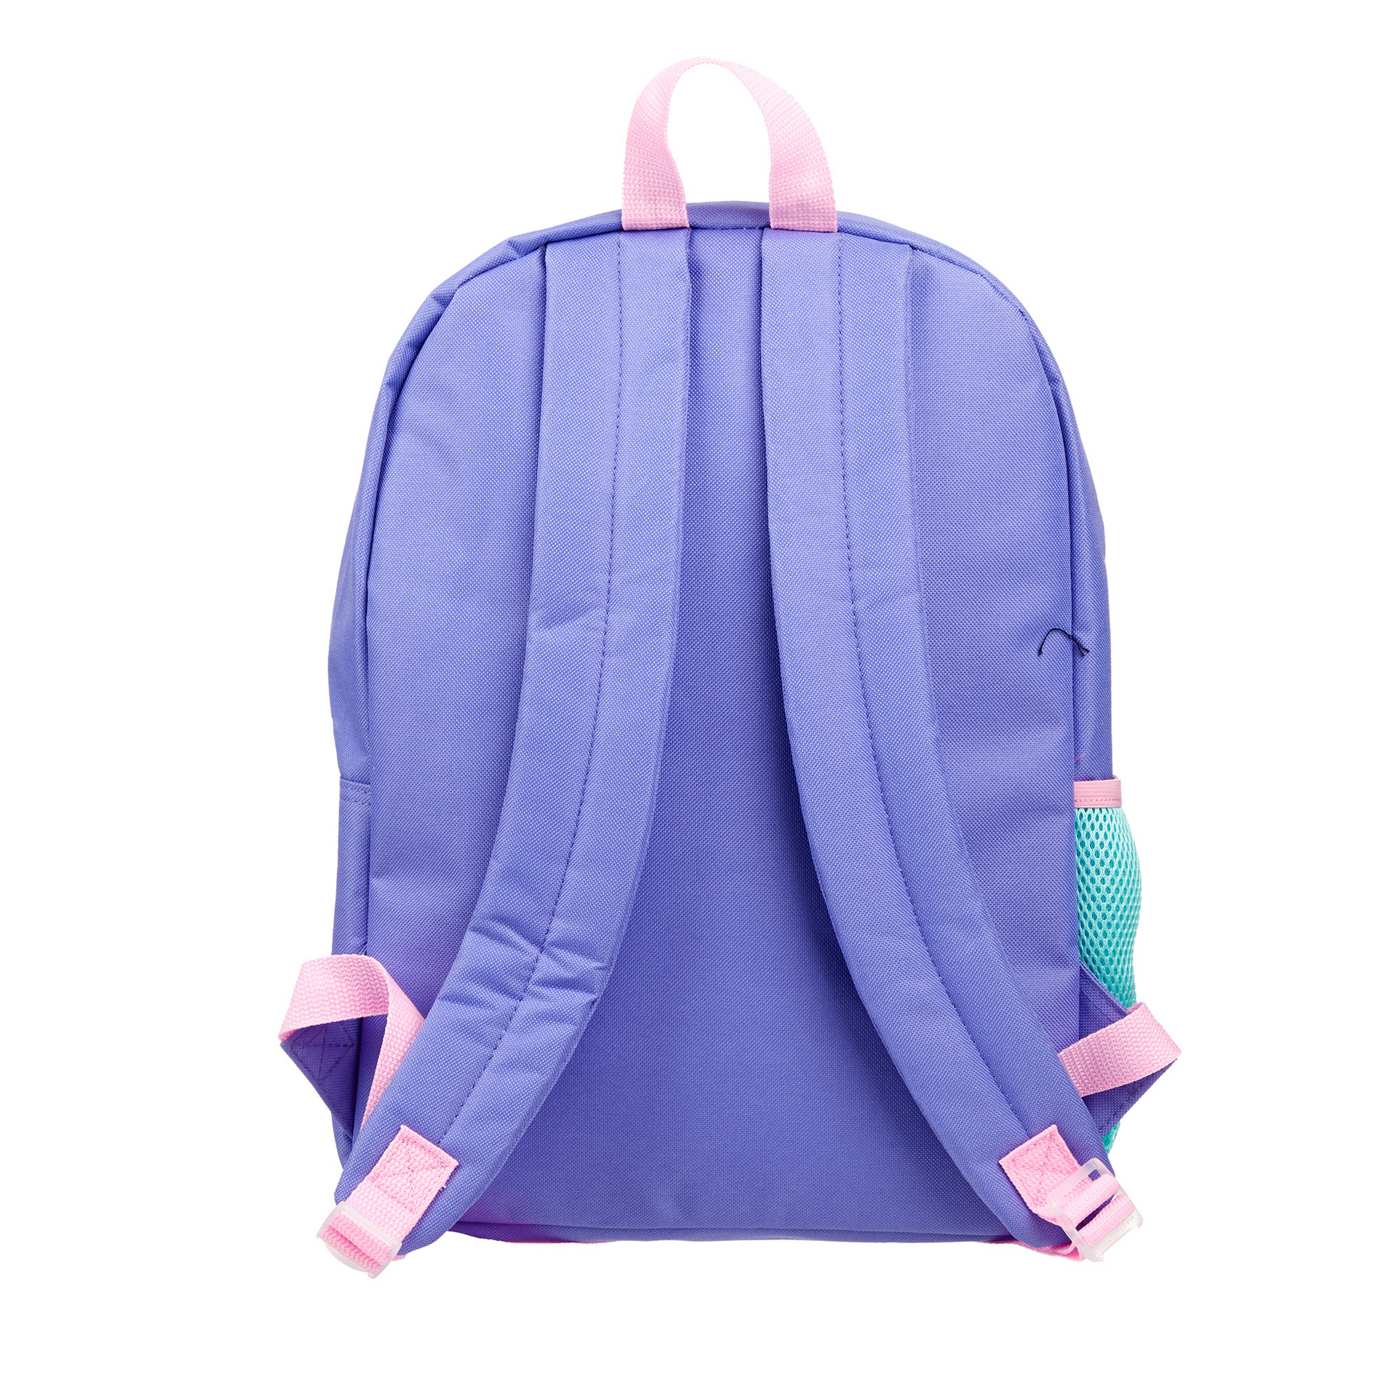 Squishmallows Backpack Set; image 2 of 6